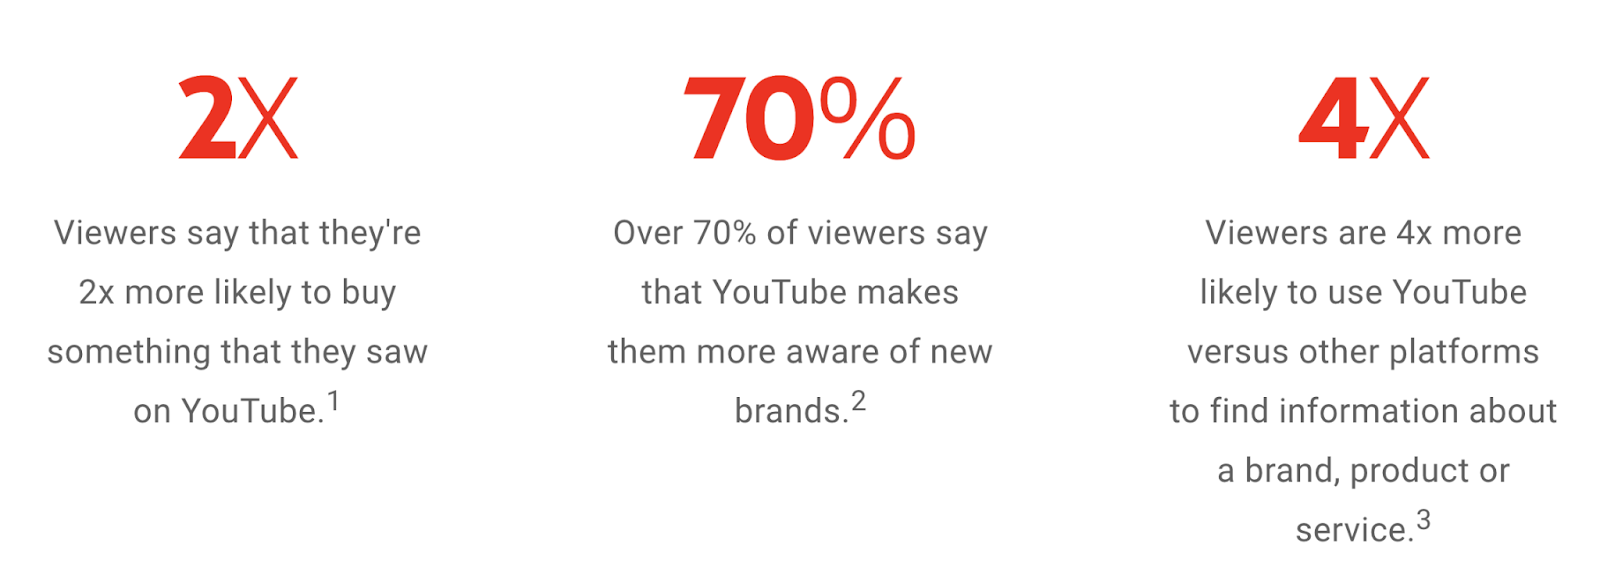 YouTube’s Online Video Advertising Campaign statistics